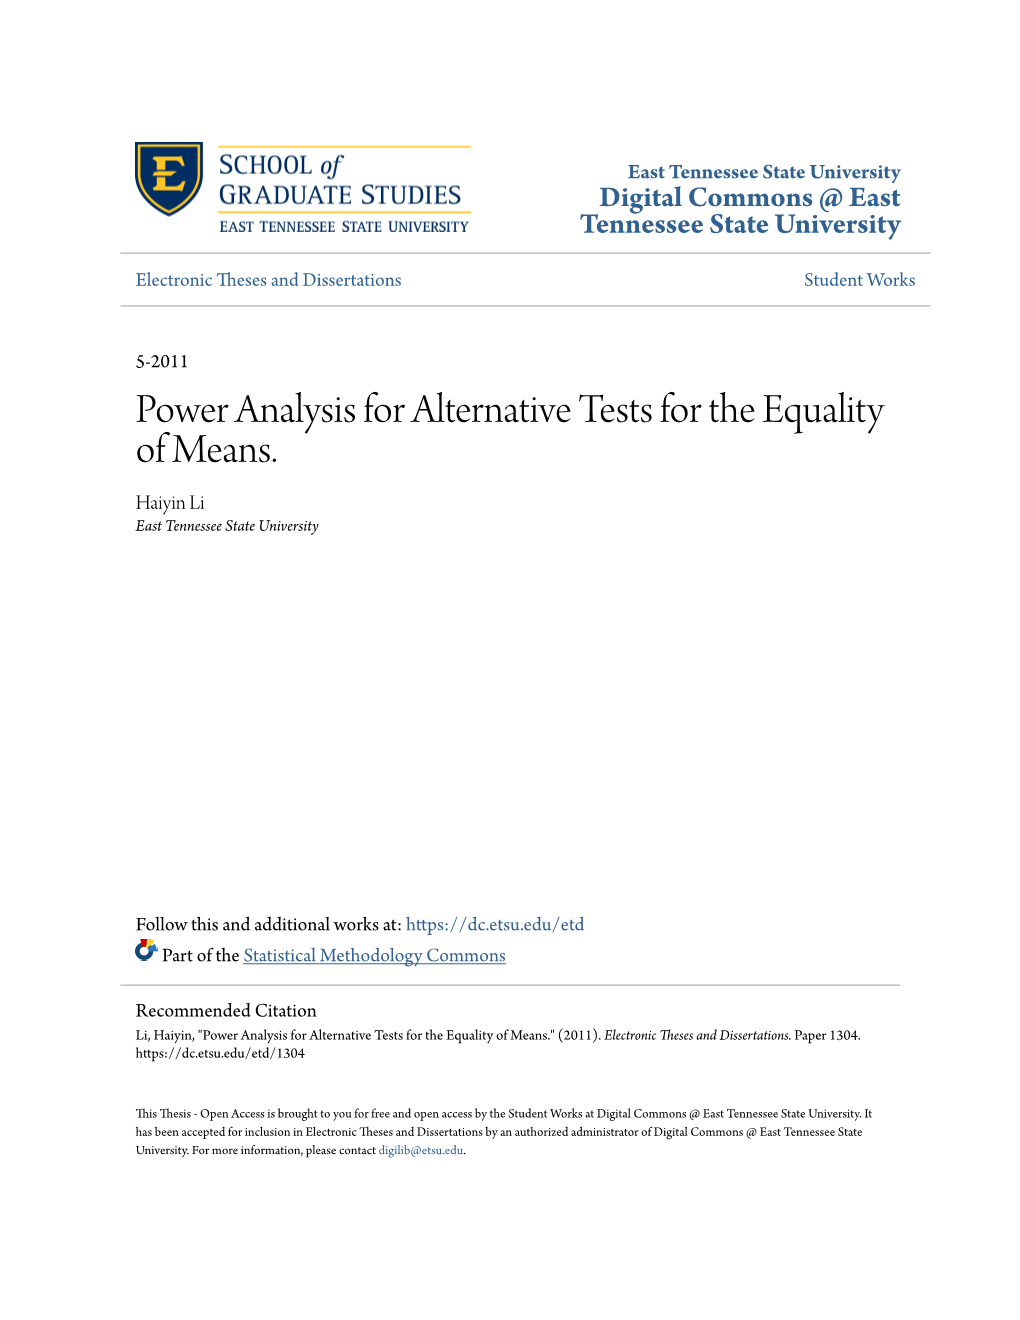 Power Analysis for Alternative Tests for the Equality of Means. Haiyin Li East Tennessee State University